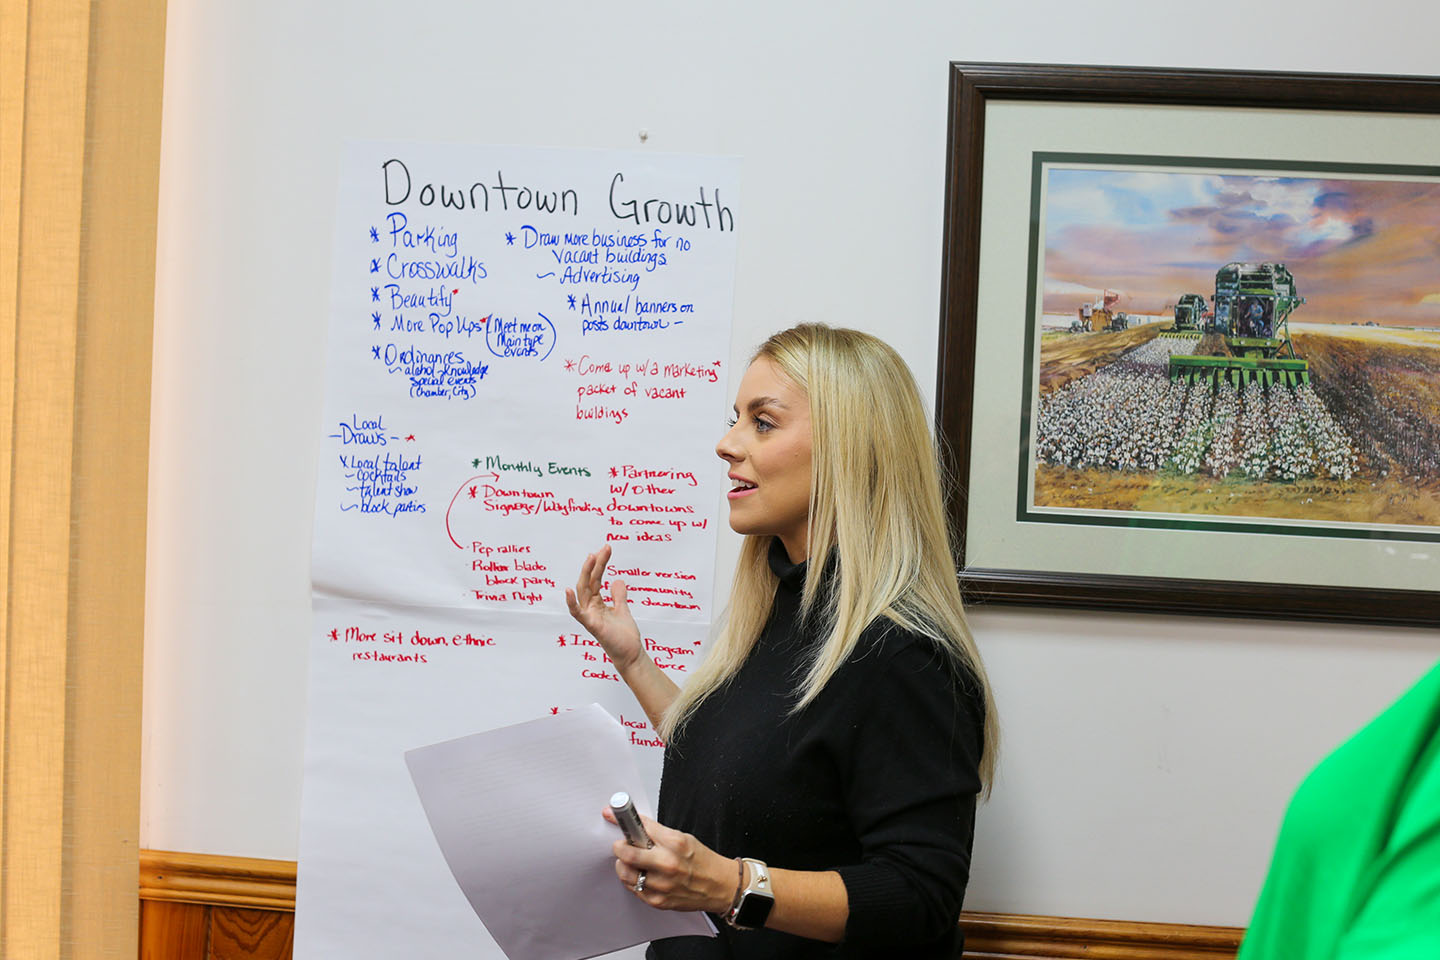 woman talking presenting about flip chart labelled downtown growth